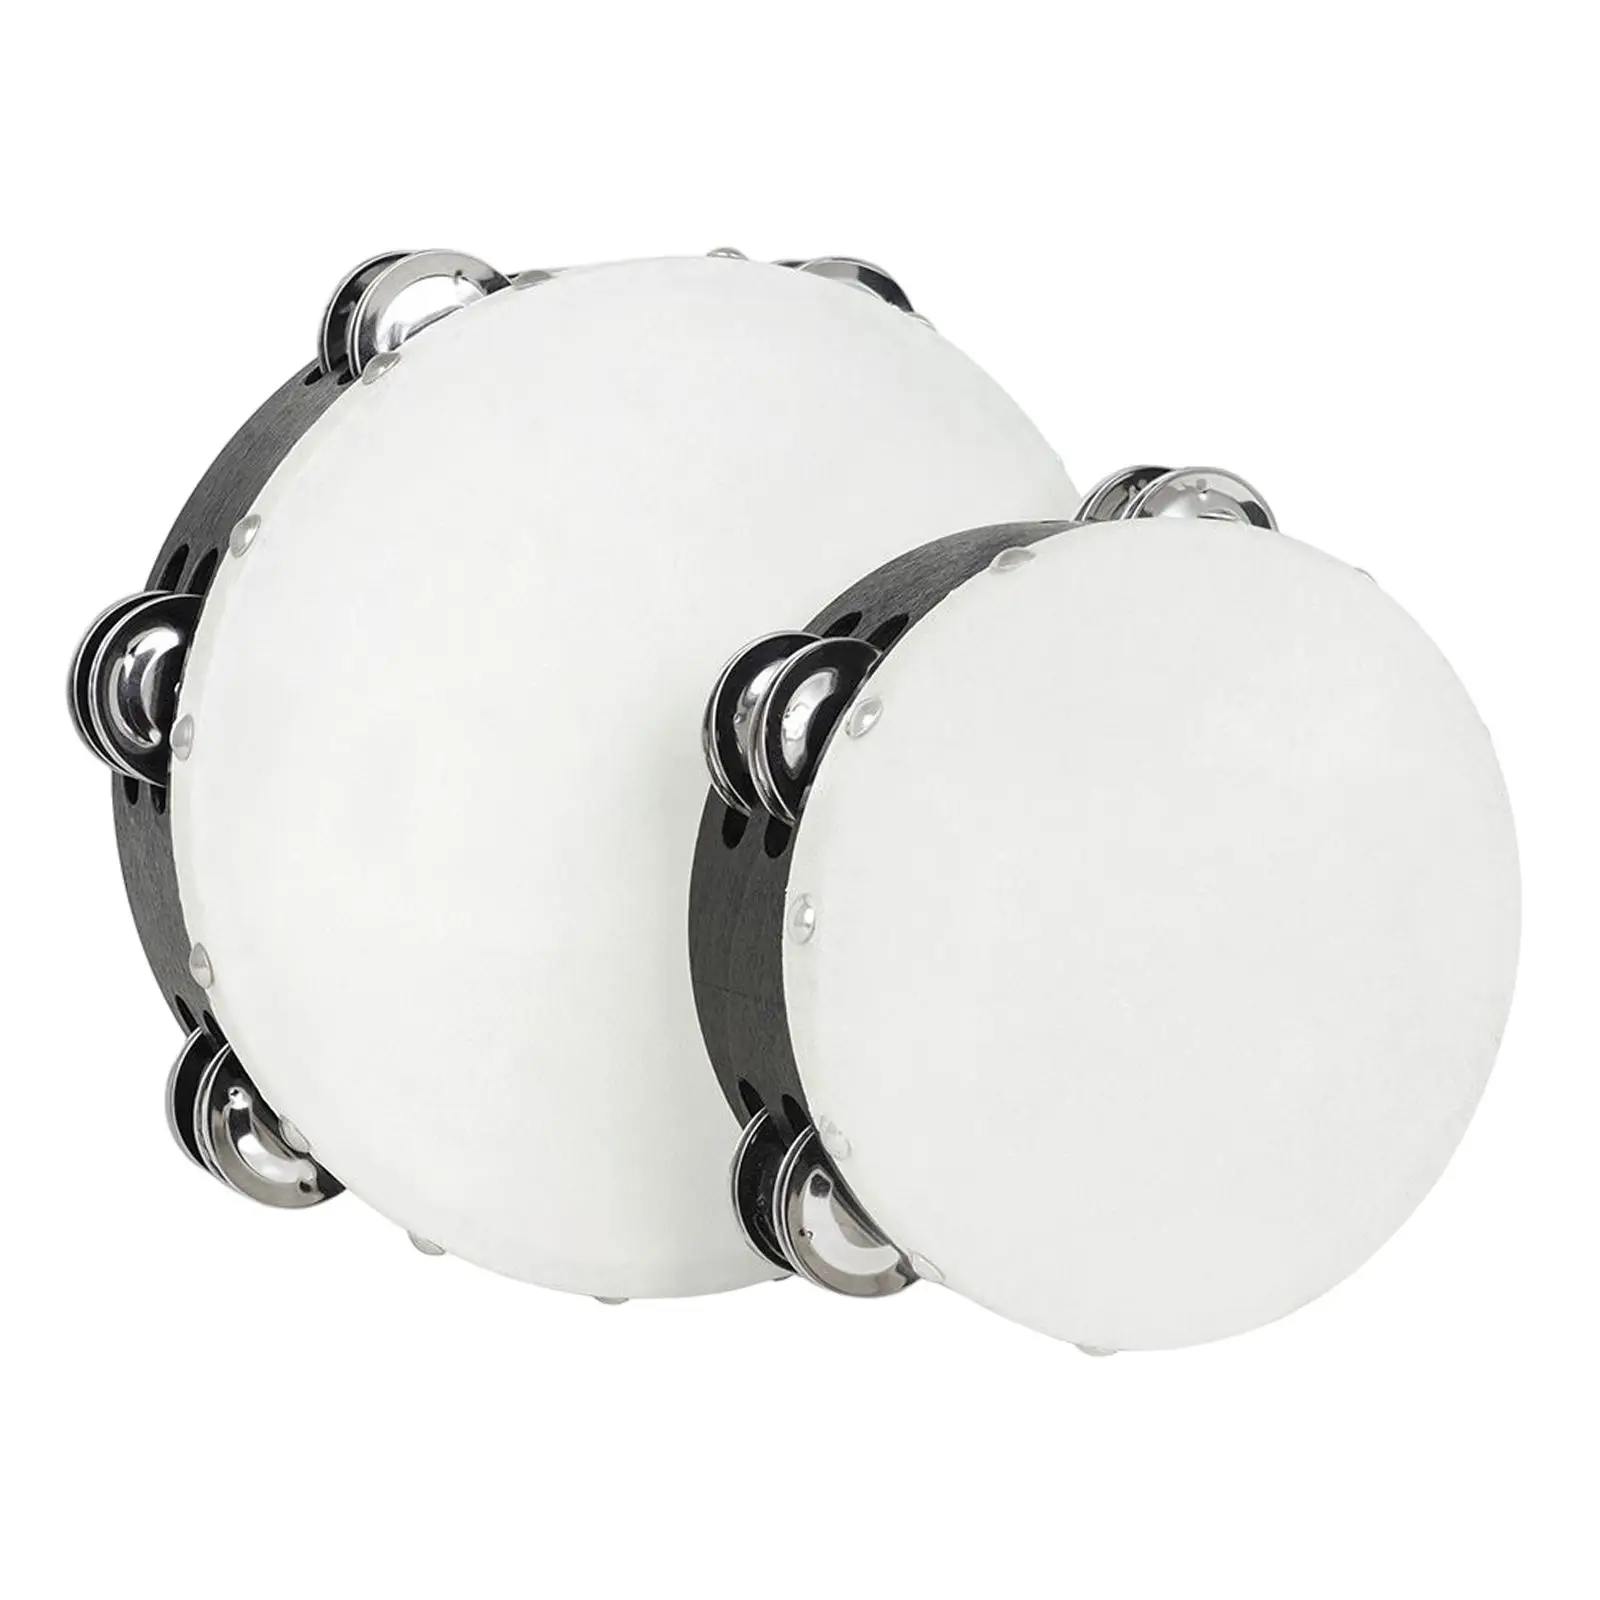 2 Pieces (8 Inch and 6in) Wood Handheld Tambourine Drum, Double Row Metal Wooden Tambourines Musical Percussion Instrument